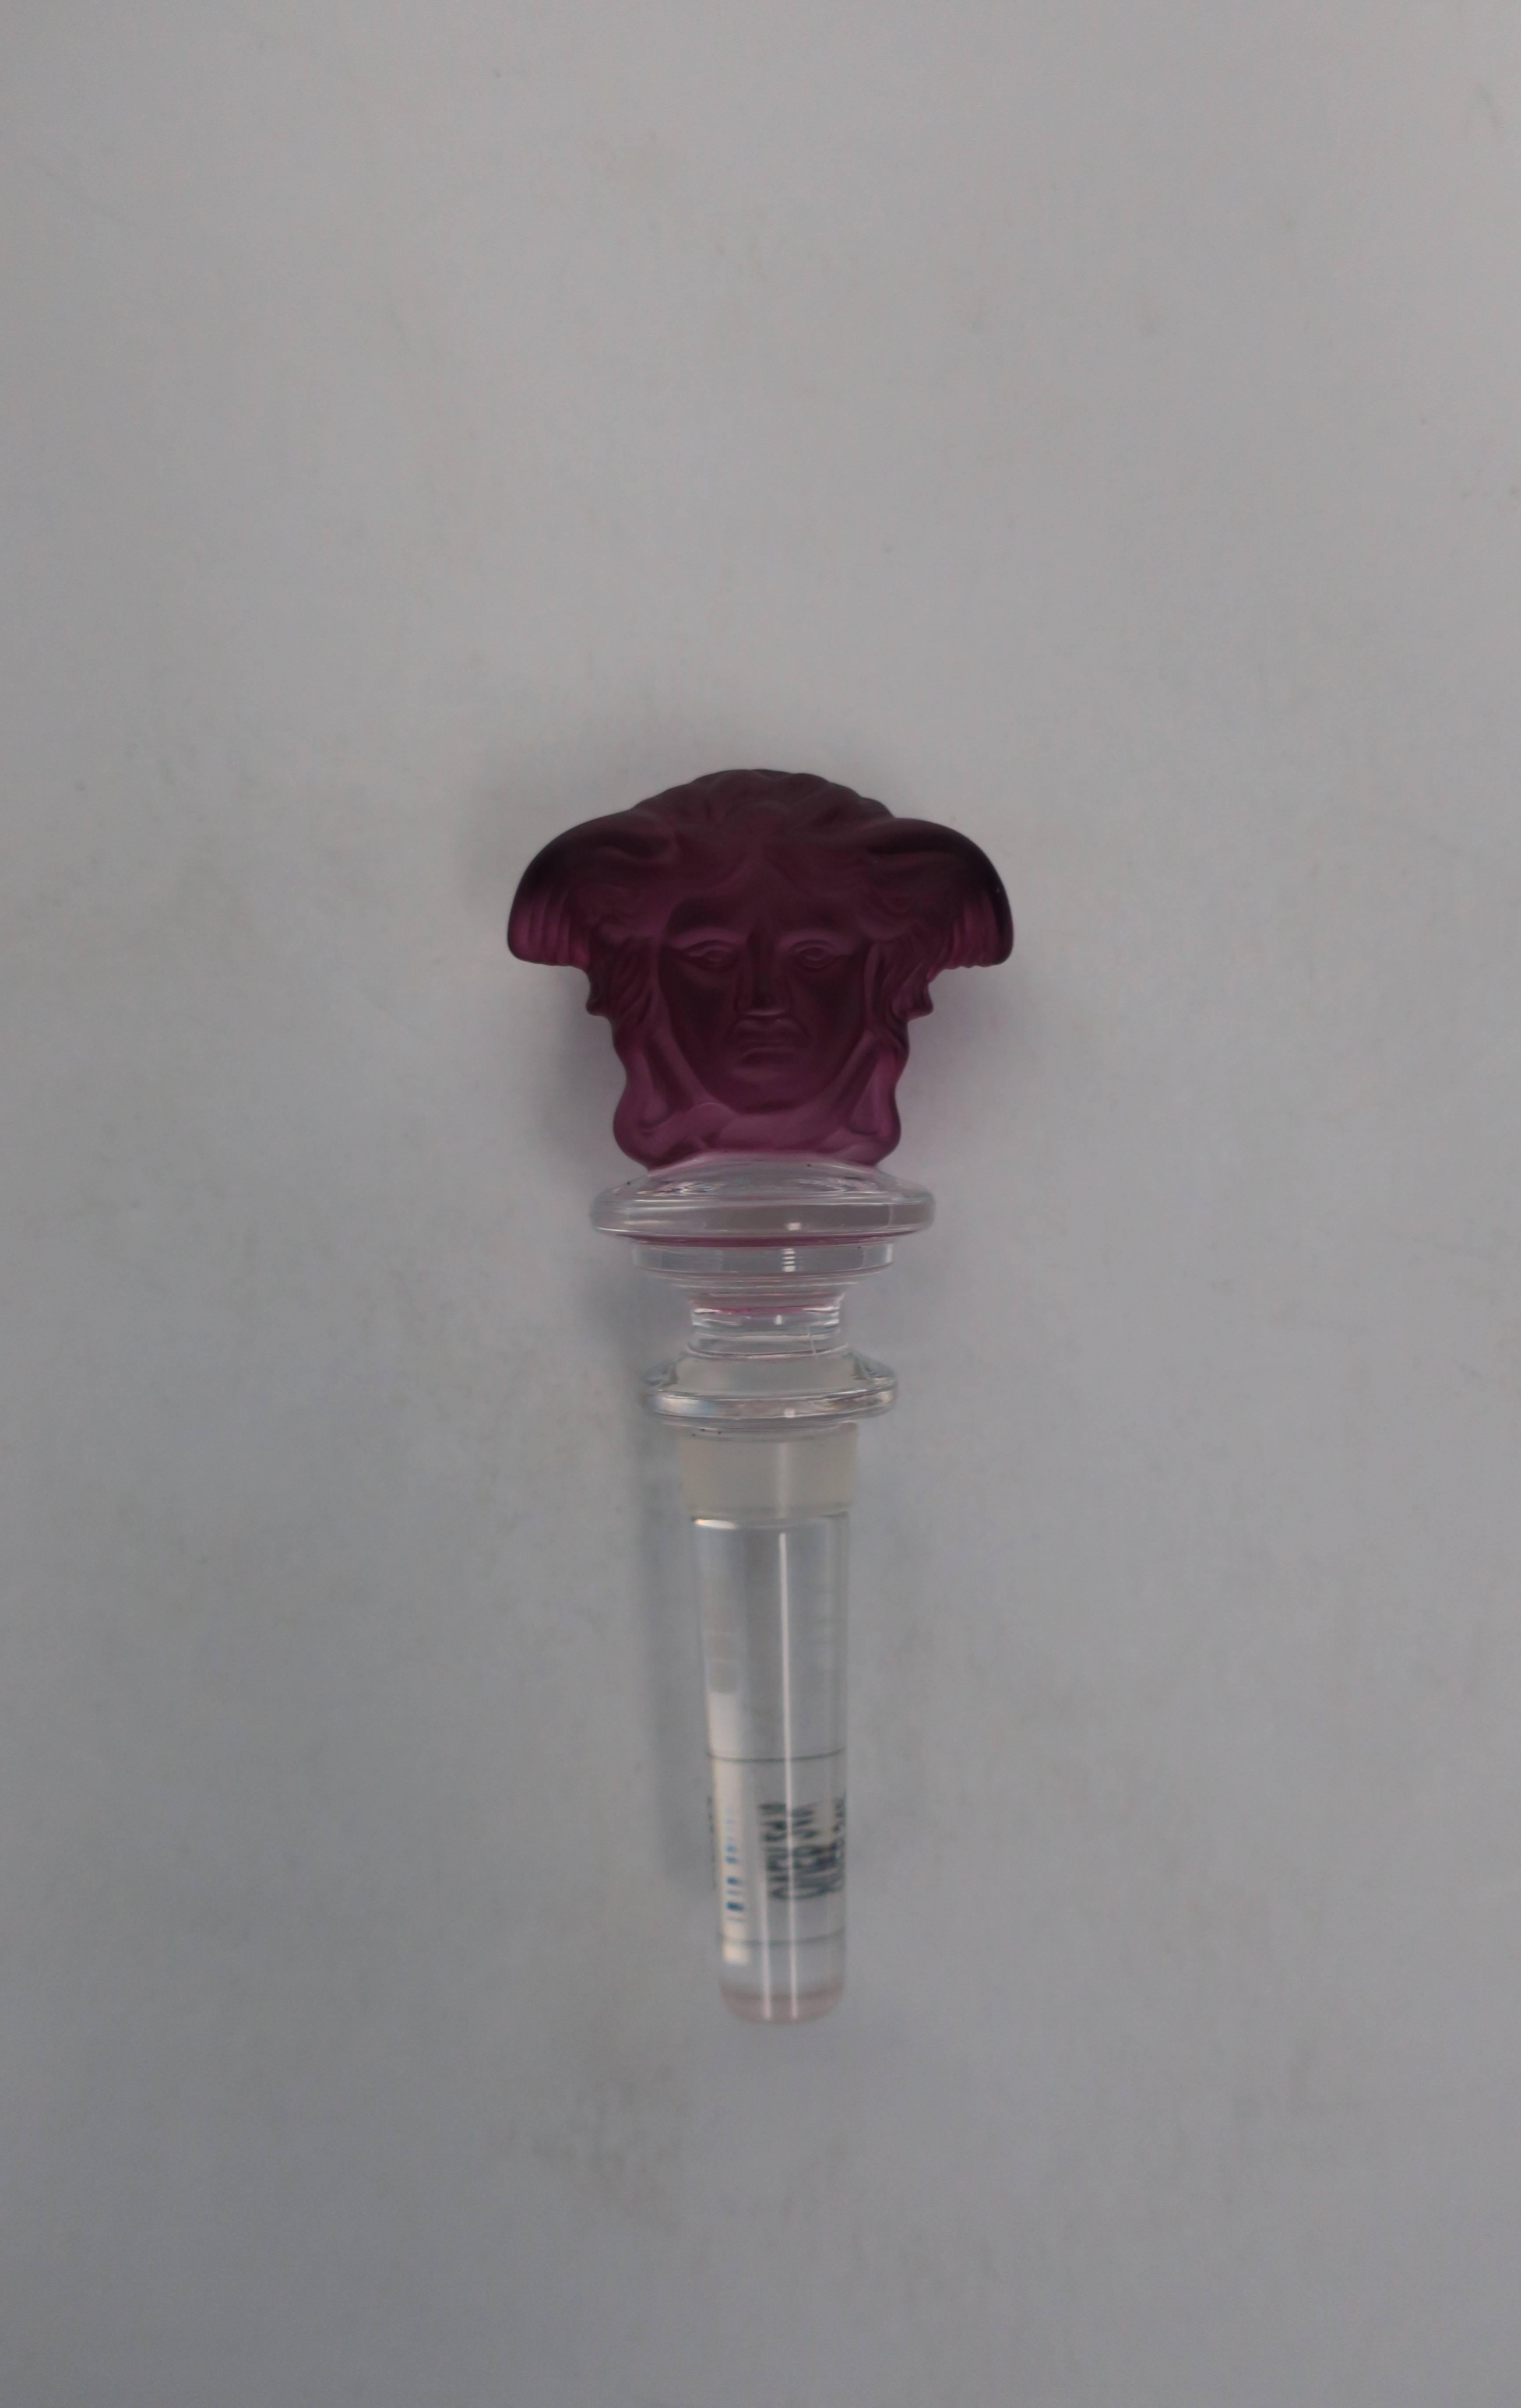 A beautiful Versace 'medusa' purple amethyst crystal wine stopper, in original box; Made by Rosenthal for Versace Home Collection. Medusa head is on both sides. With maker's marks: 